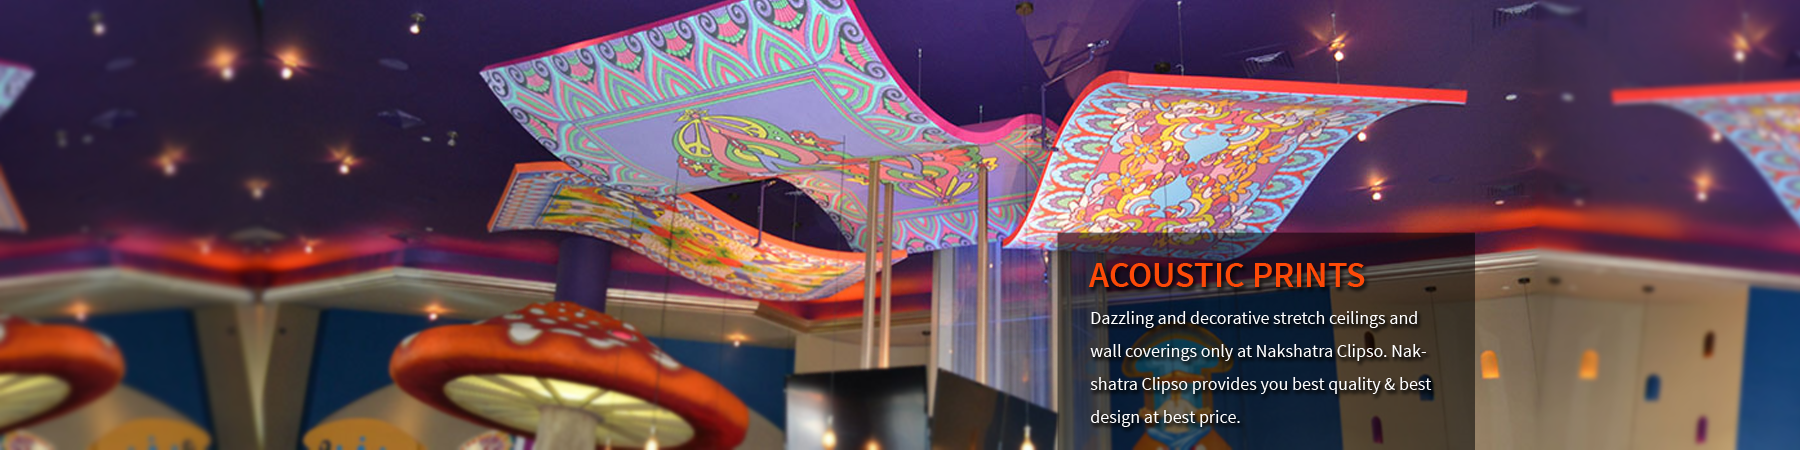 Acoustic Printed Stretch Ceilings and Wall Coverings